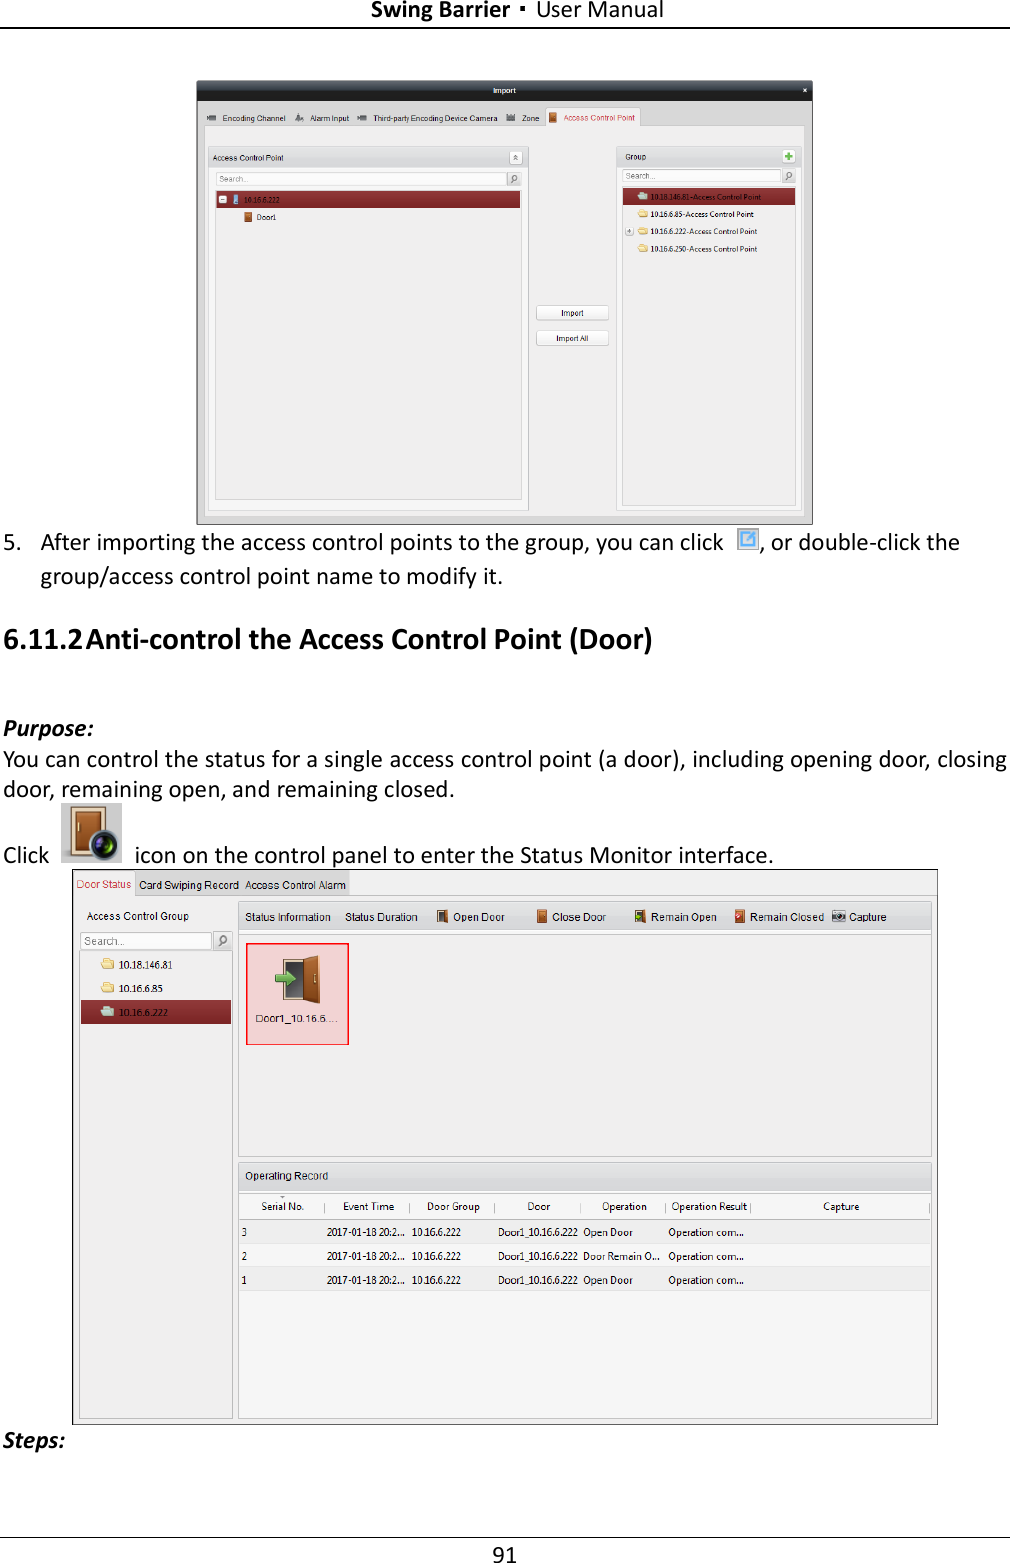 Swing Barrier·User Manual 91   5. After importing the access control points to the group, you can click  , or double-click the group/access control point name to modify it. 6.11.2 Anti-control the Access Control Point (Door) Purpose:   You can control the status for a single access control point (a door), including opening door, closing door, remaining open, and remaining closed.   Click    icon on the control panel to enter the Status Monitor interface.  Steps: 